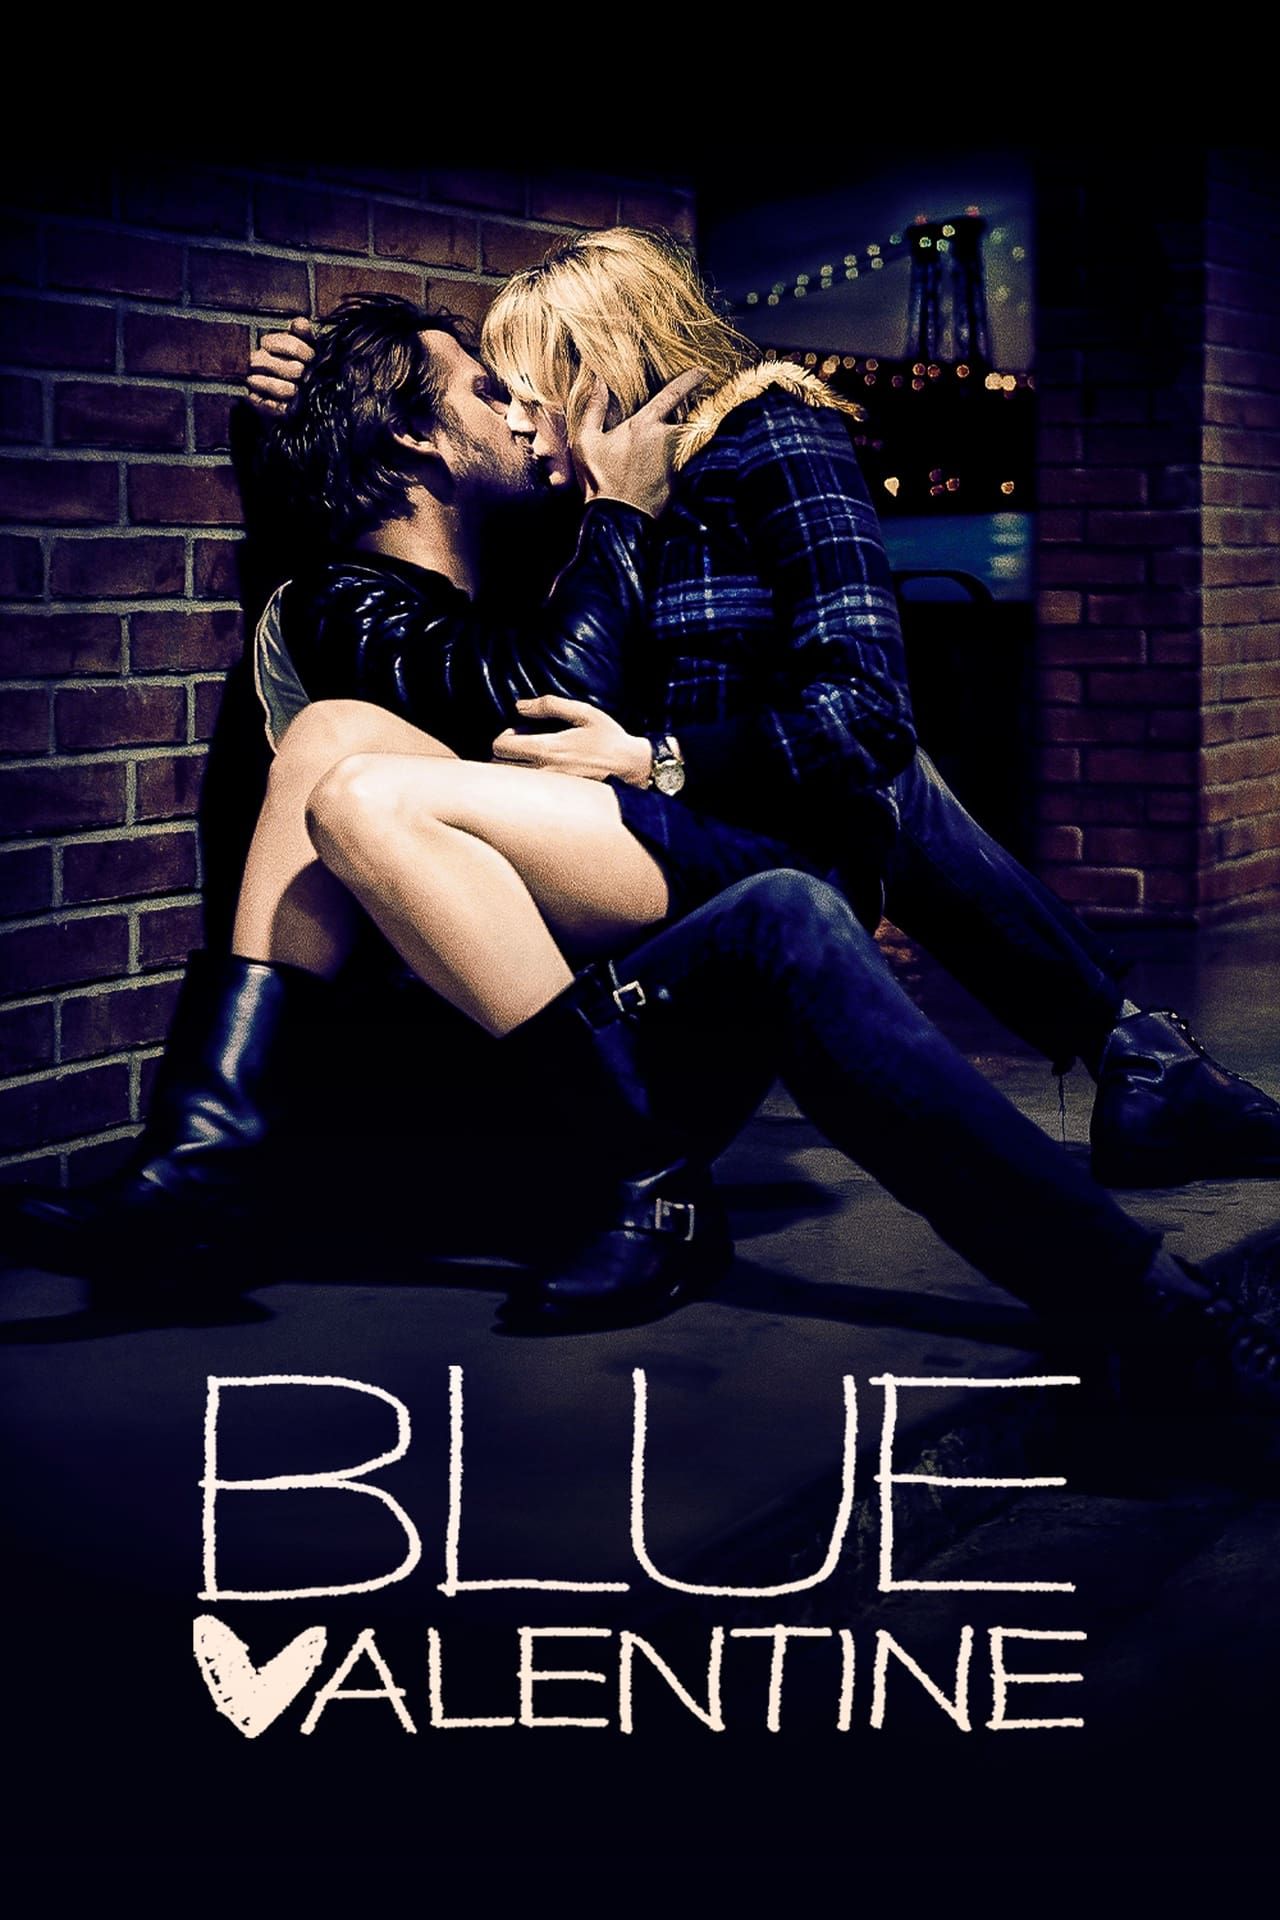 Blue Valentine Movie Poster Showing Ryan Gosling as Dean and Michelle Williams as Cindy Kissing up against a Brick Wall